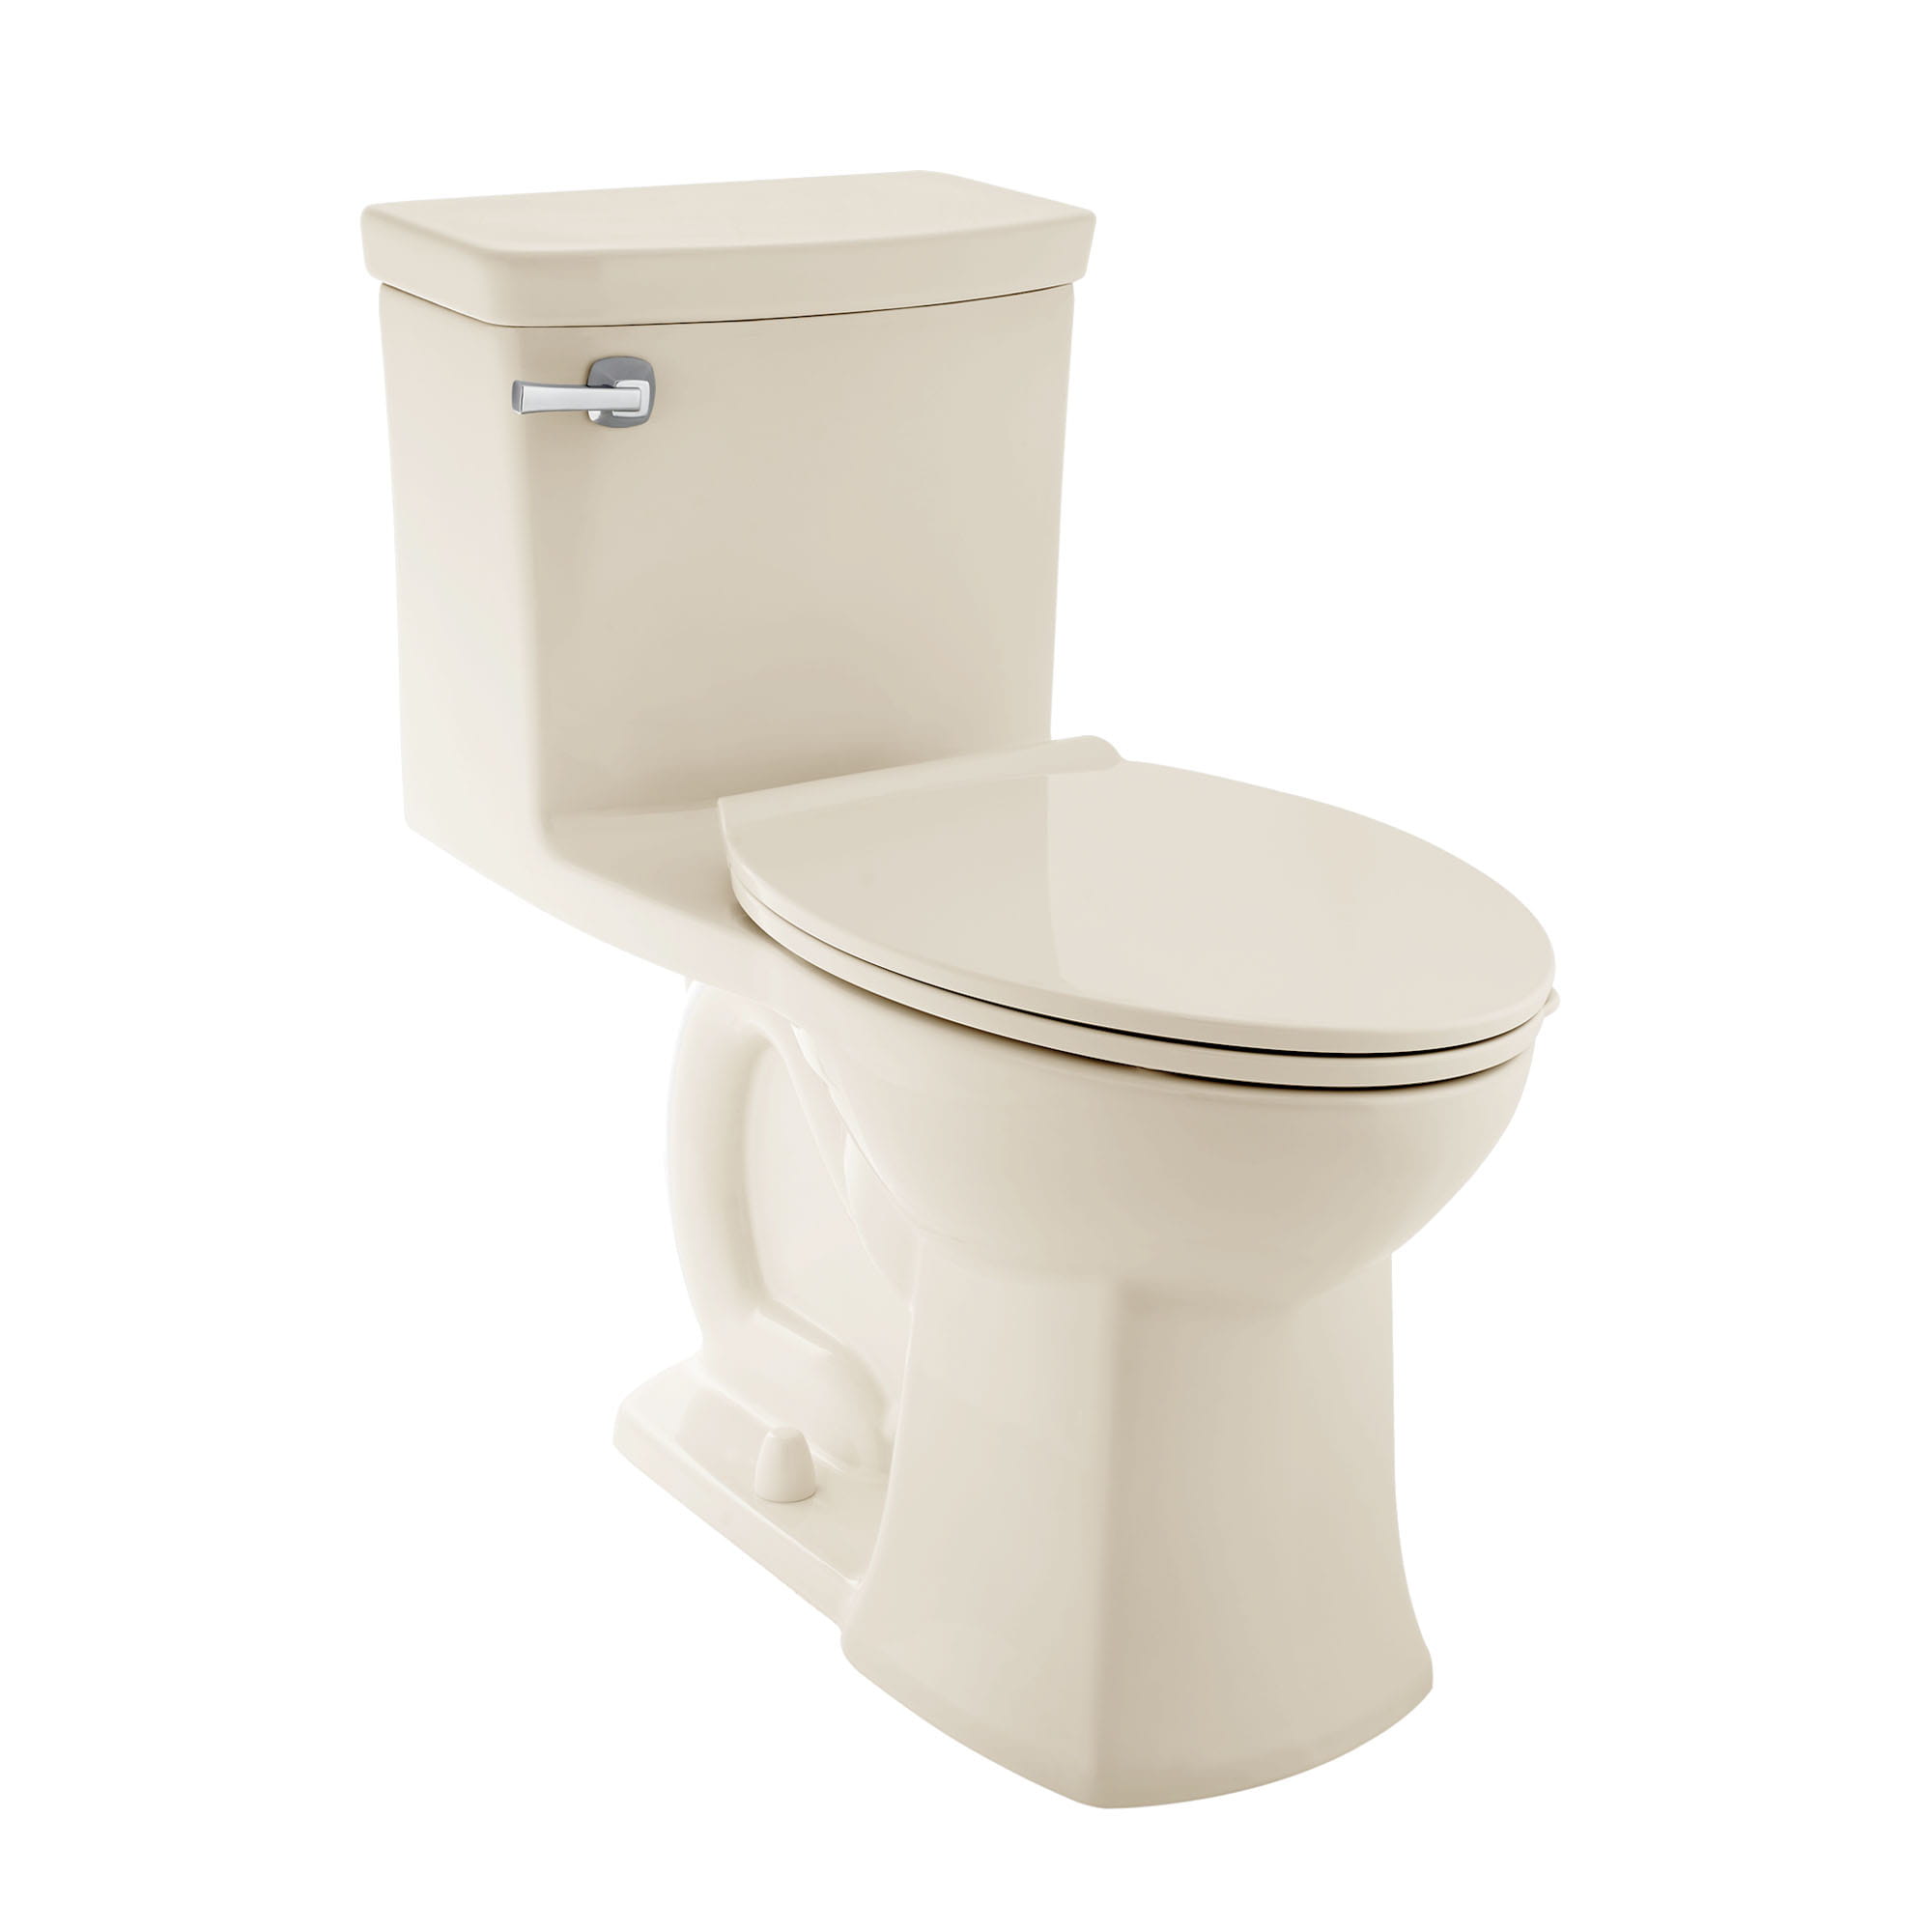 Townsend VorMax One-Piece 1.28 gpf/4.8 Lpf Chair Height Elongated Toilet with Seat